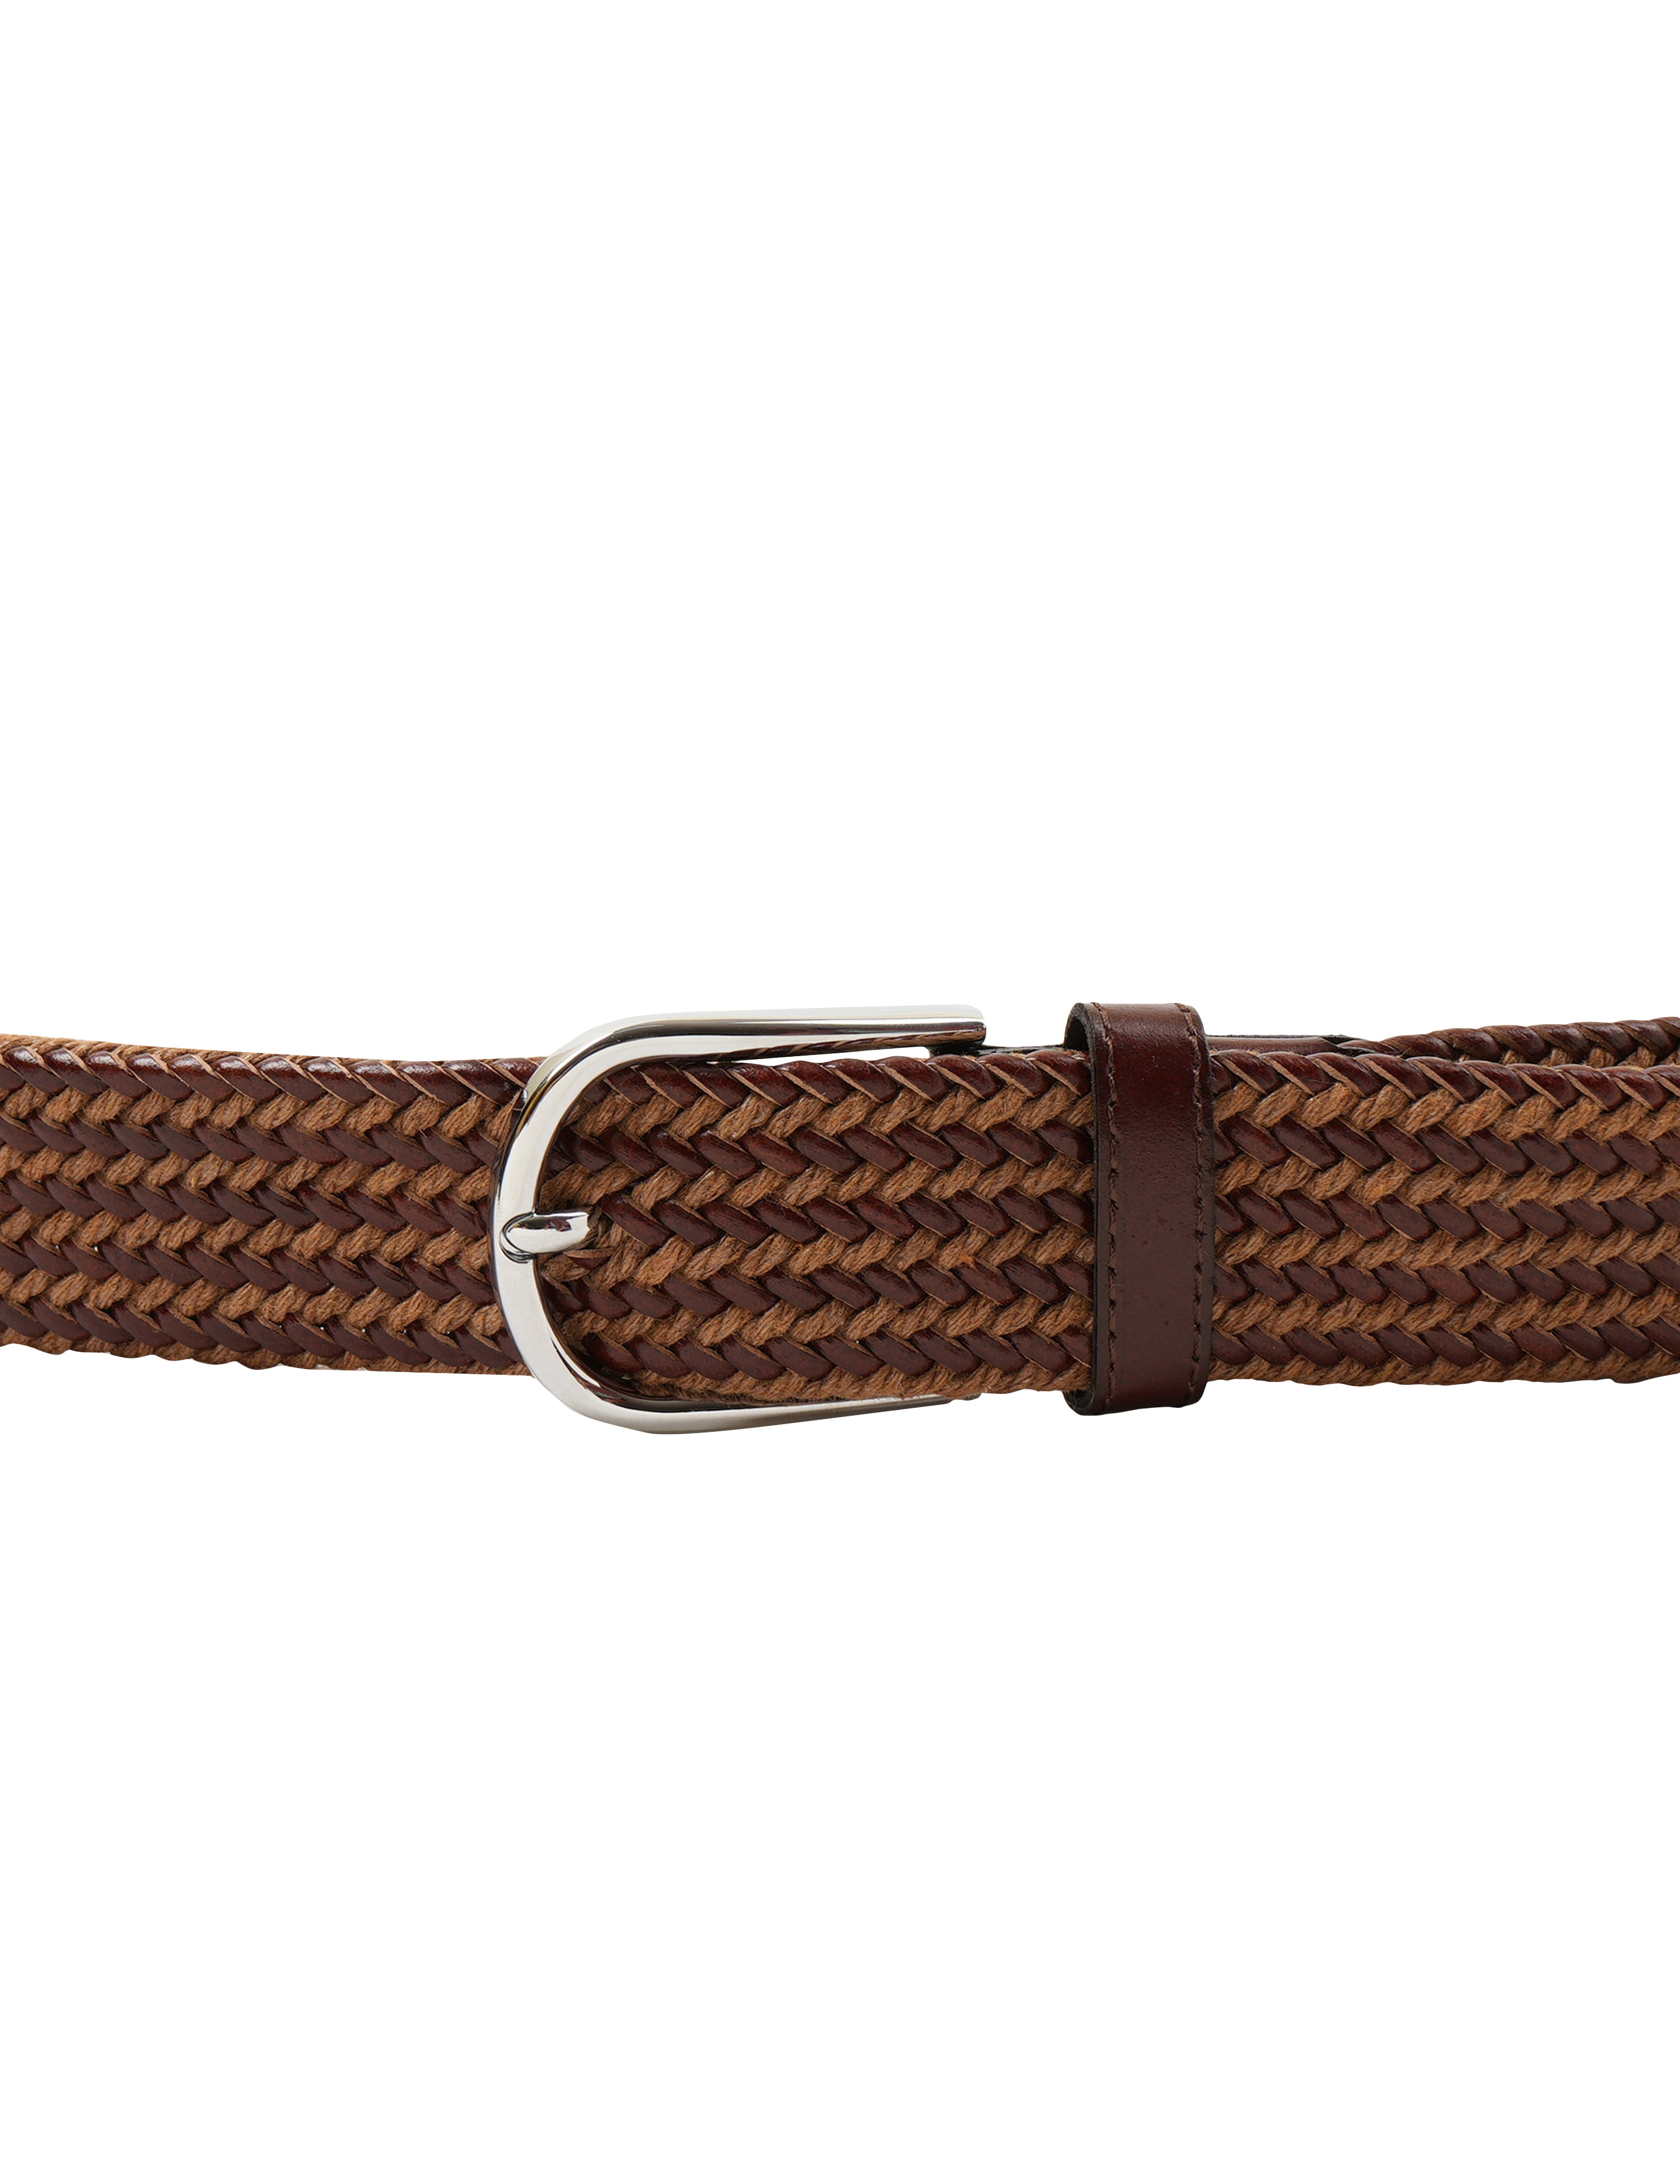 Bulchee Men's Collection | Woven Leather Belt | Black and Tan | Prong Buckle | BUL2321/22B